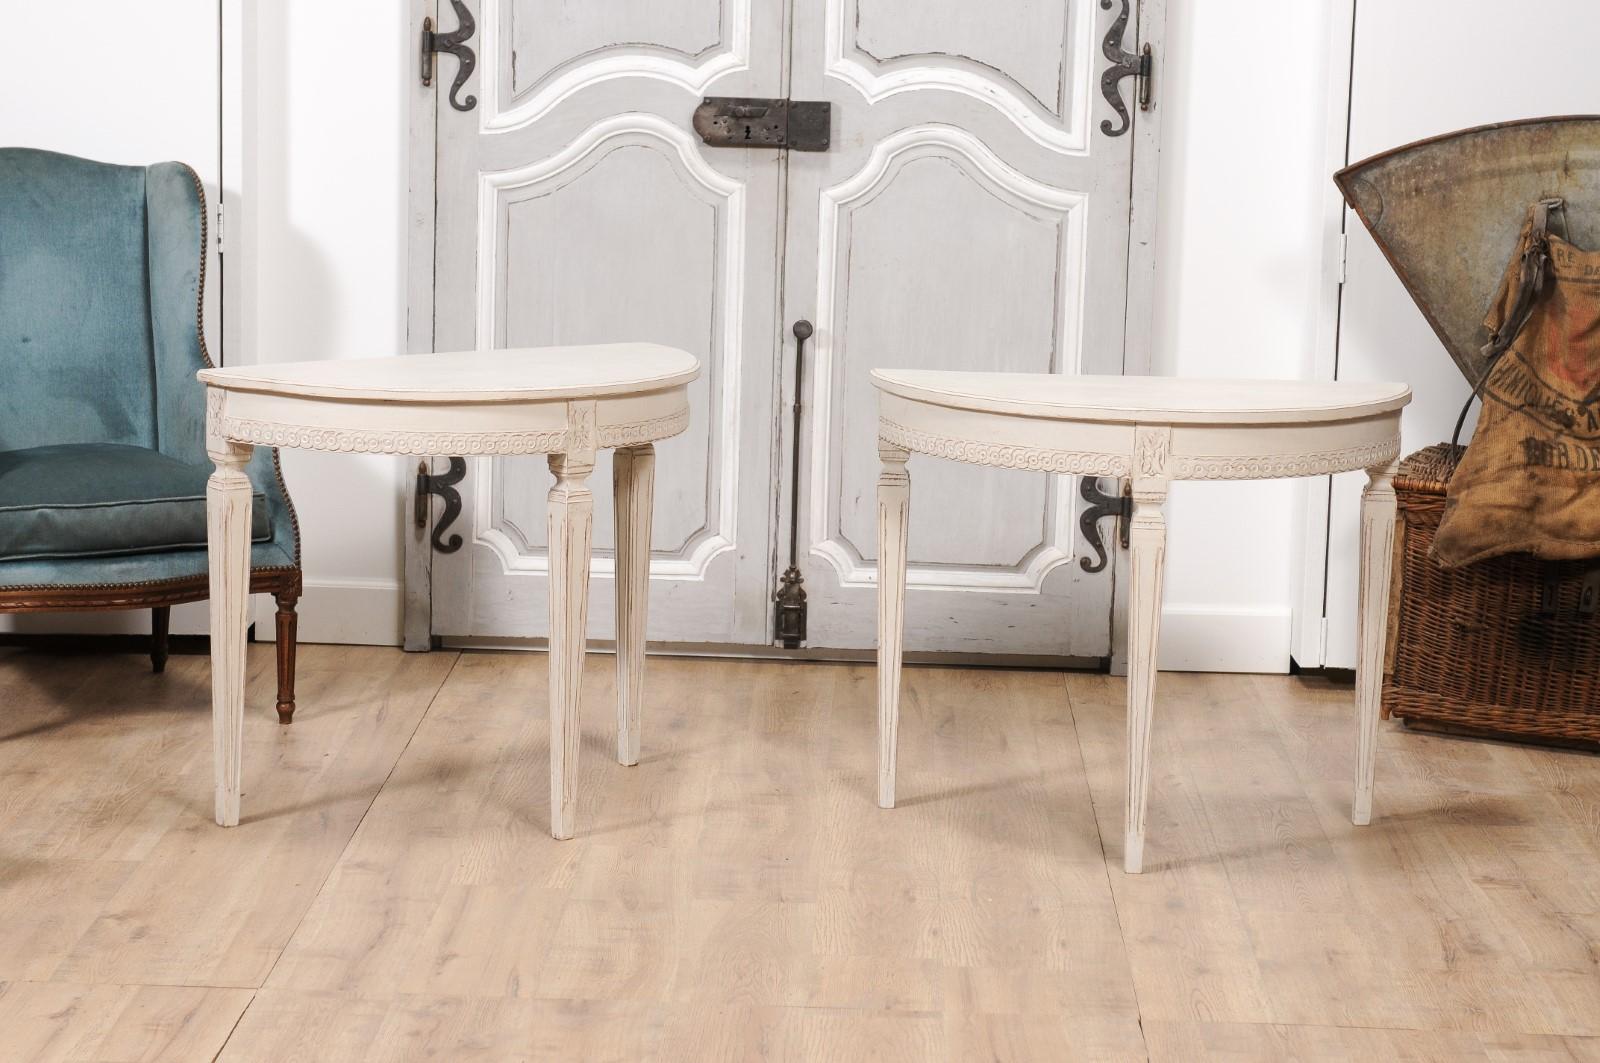 A pair of Swedish Gustavian style painted wood demi-lune console tables from circa 1850 with carved guilloche motifs, tapered legs with fluted accents and carved rosettes on the knees. Indulge in the exquisite design of this pair of Swedish